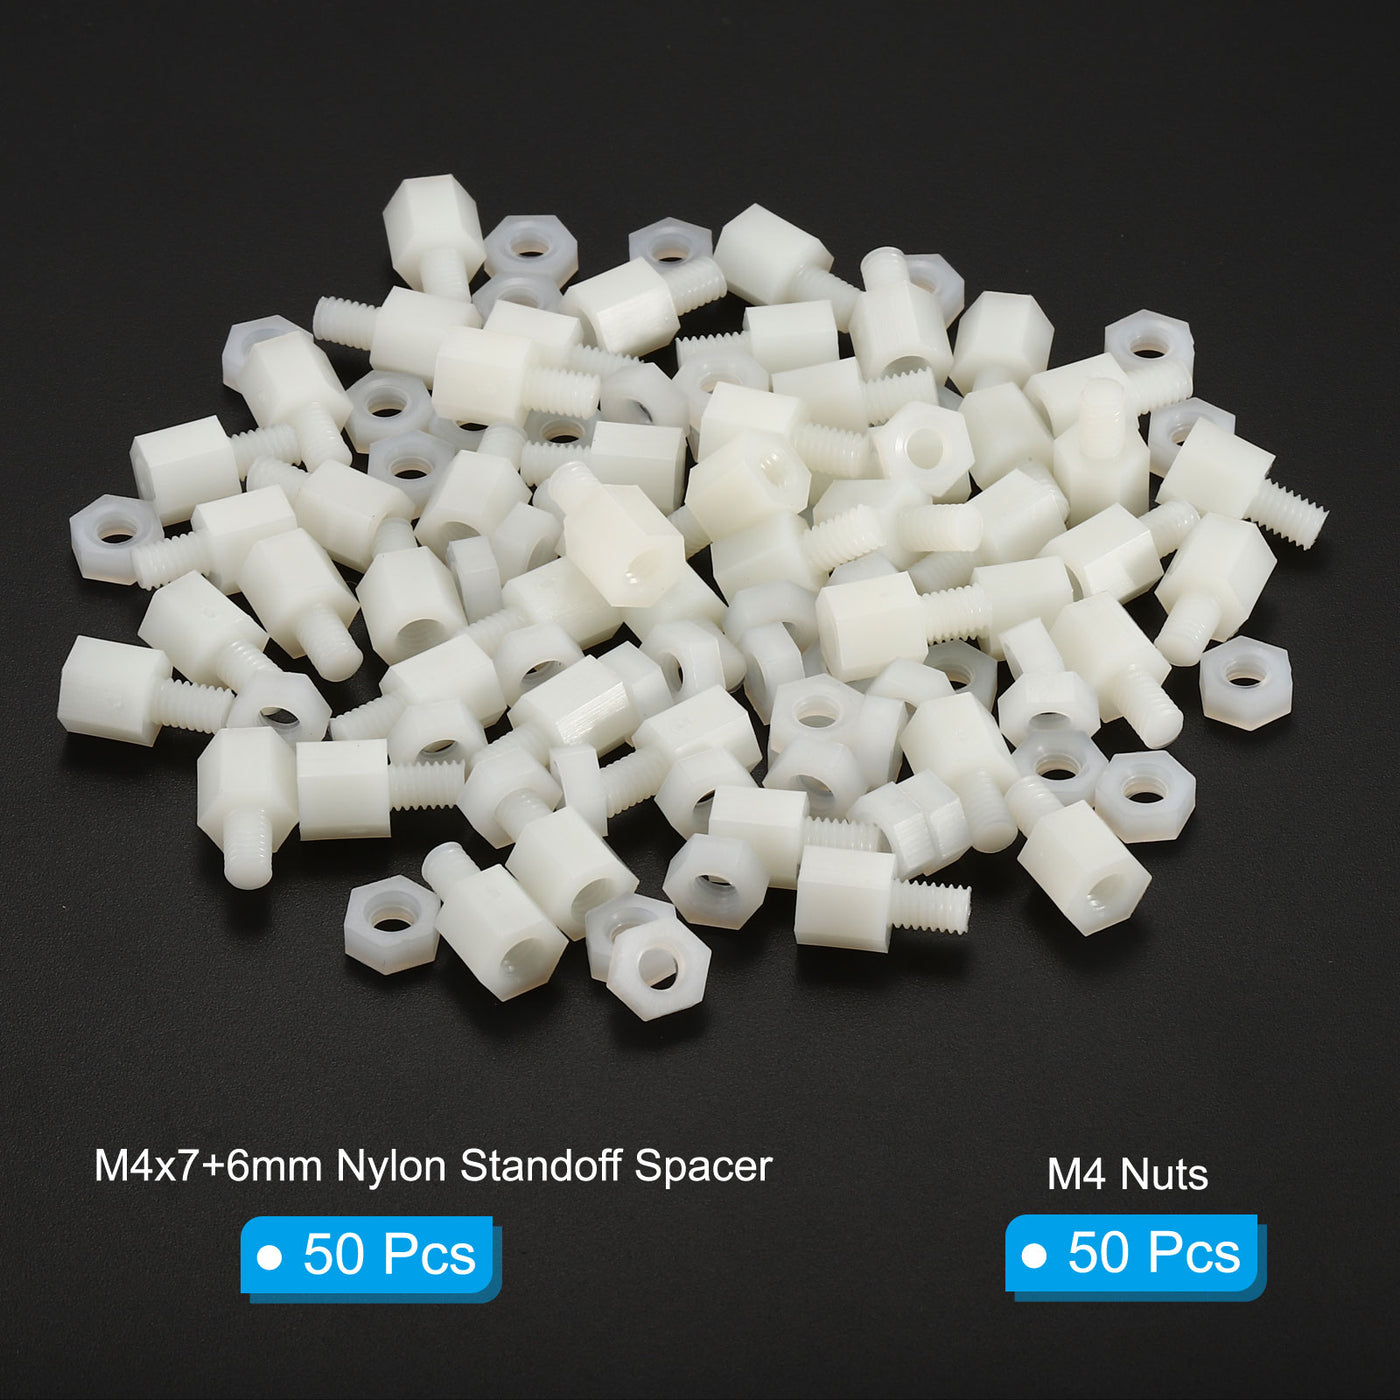 Harfington M4x7+6mm Male Female Standoff, 50Pcs Nylon Screws Hex Spacer with 50Pcs Nut for PCB, Motherboard, Computer Case, Circuit Board, Electronic